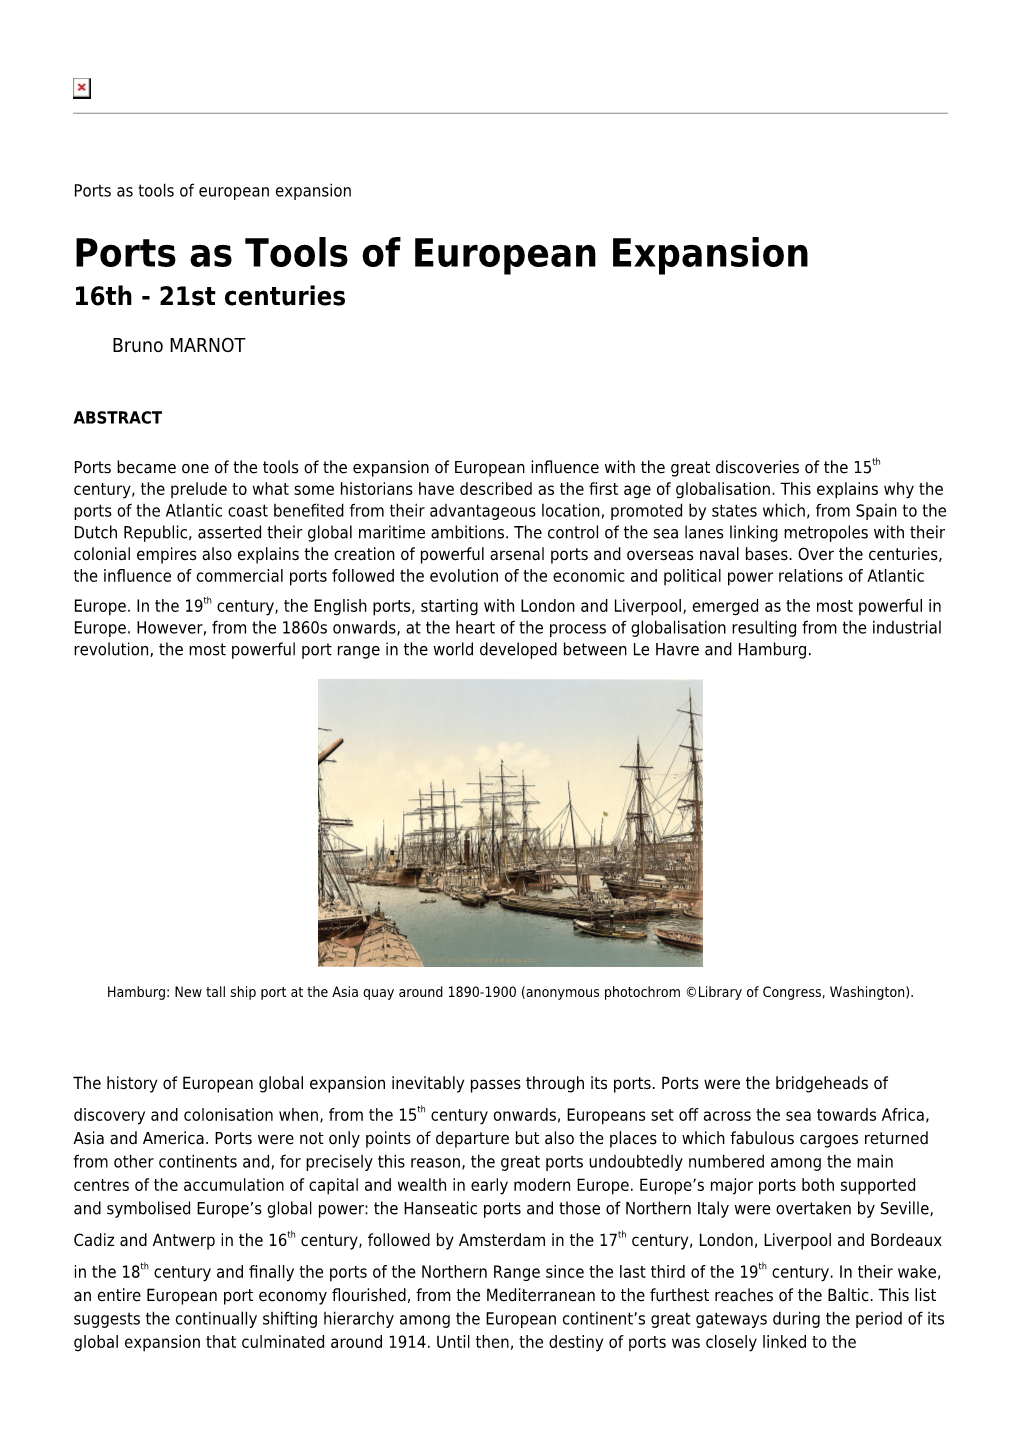 Ports As Tools of European Expansion Ports As Tools of European Expansion 16Th - 21St Centuries